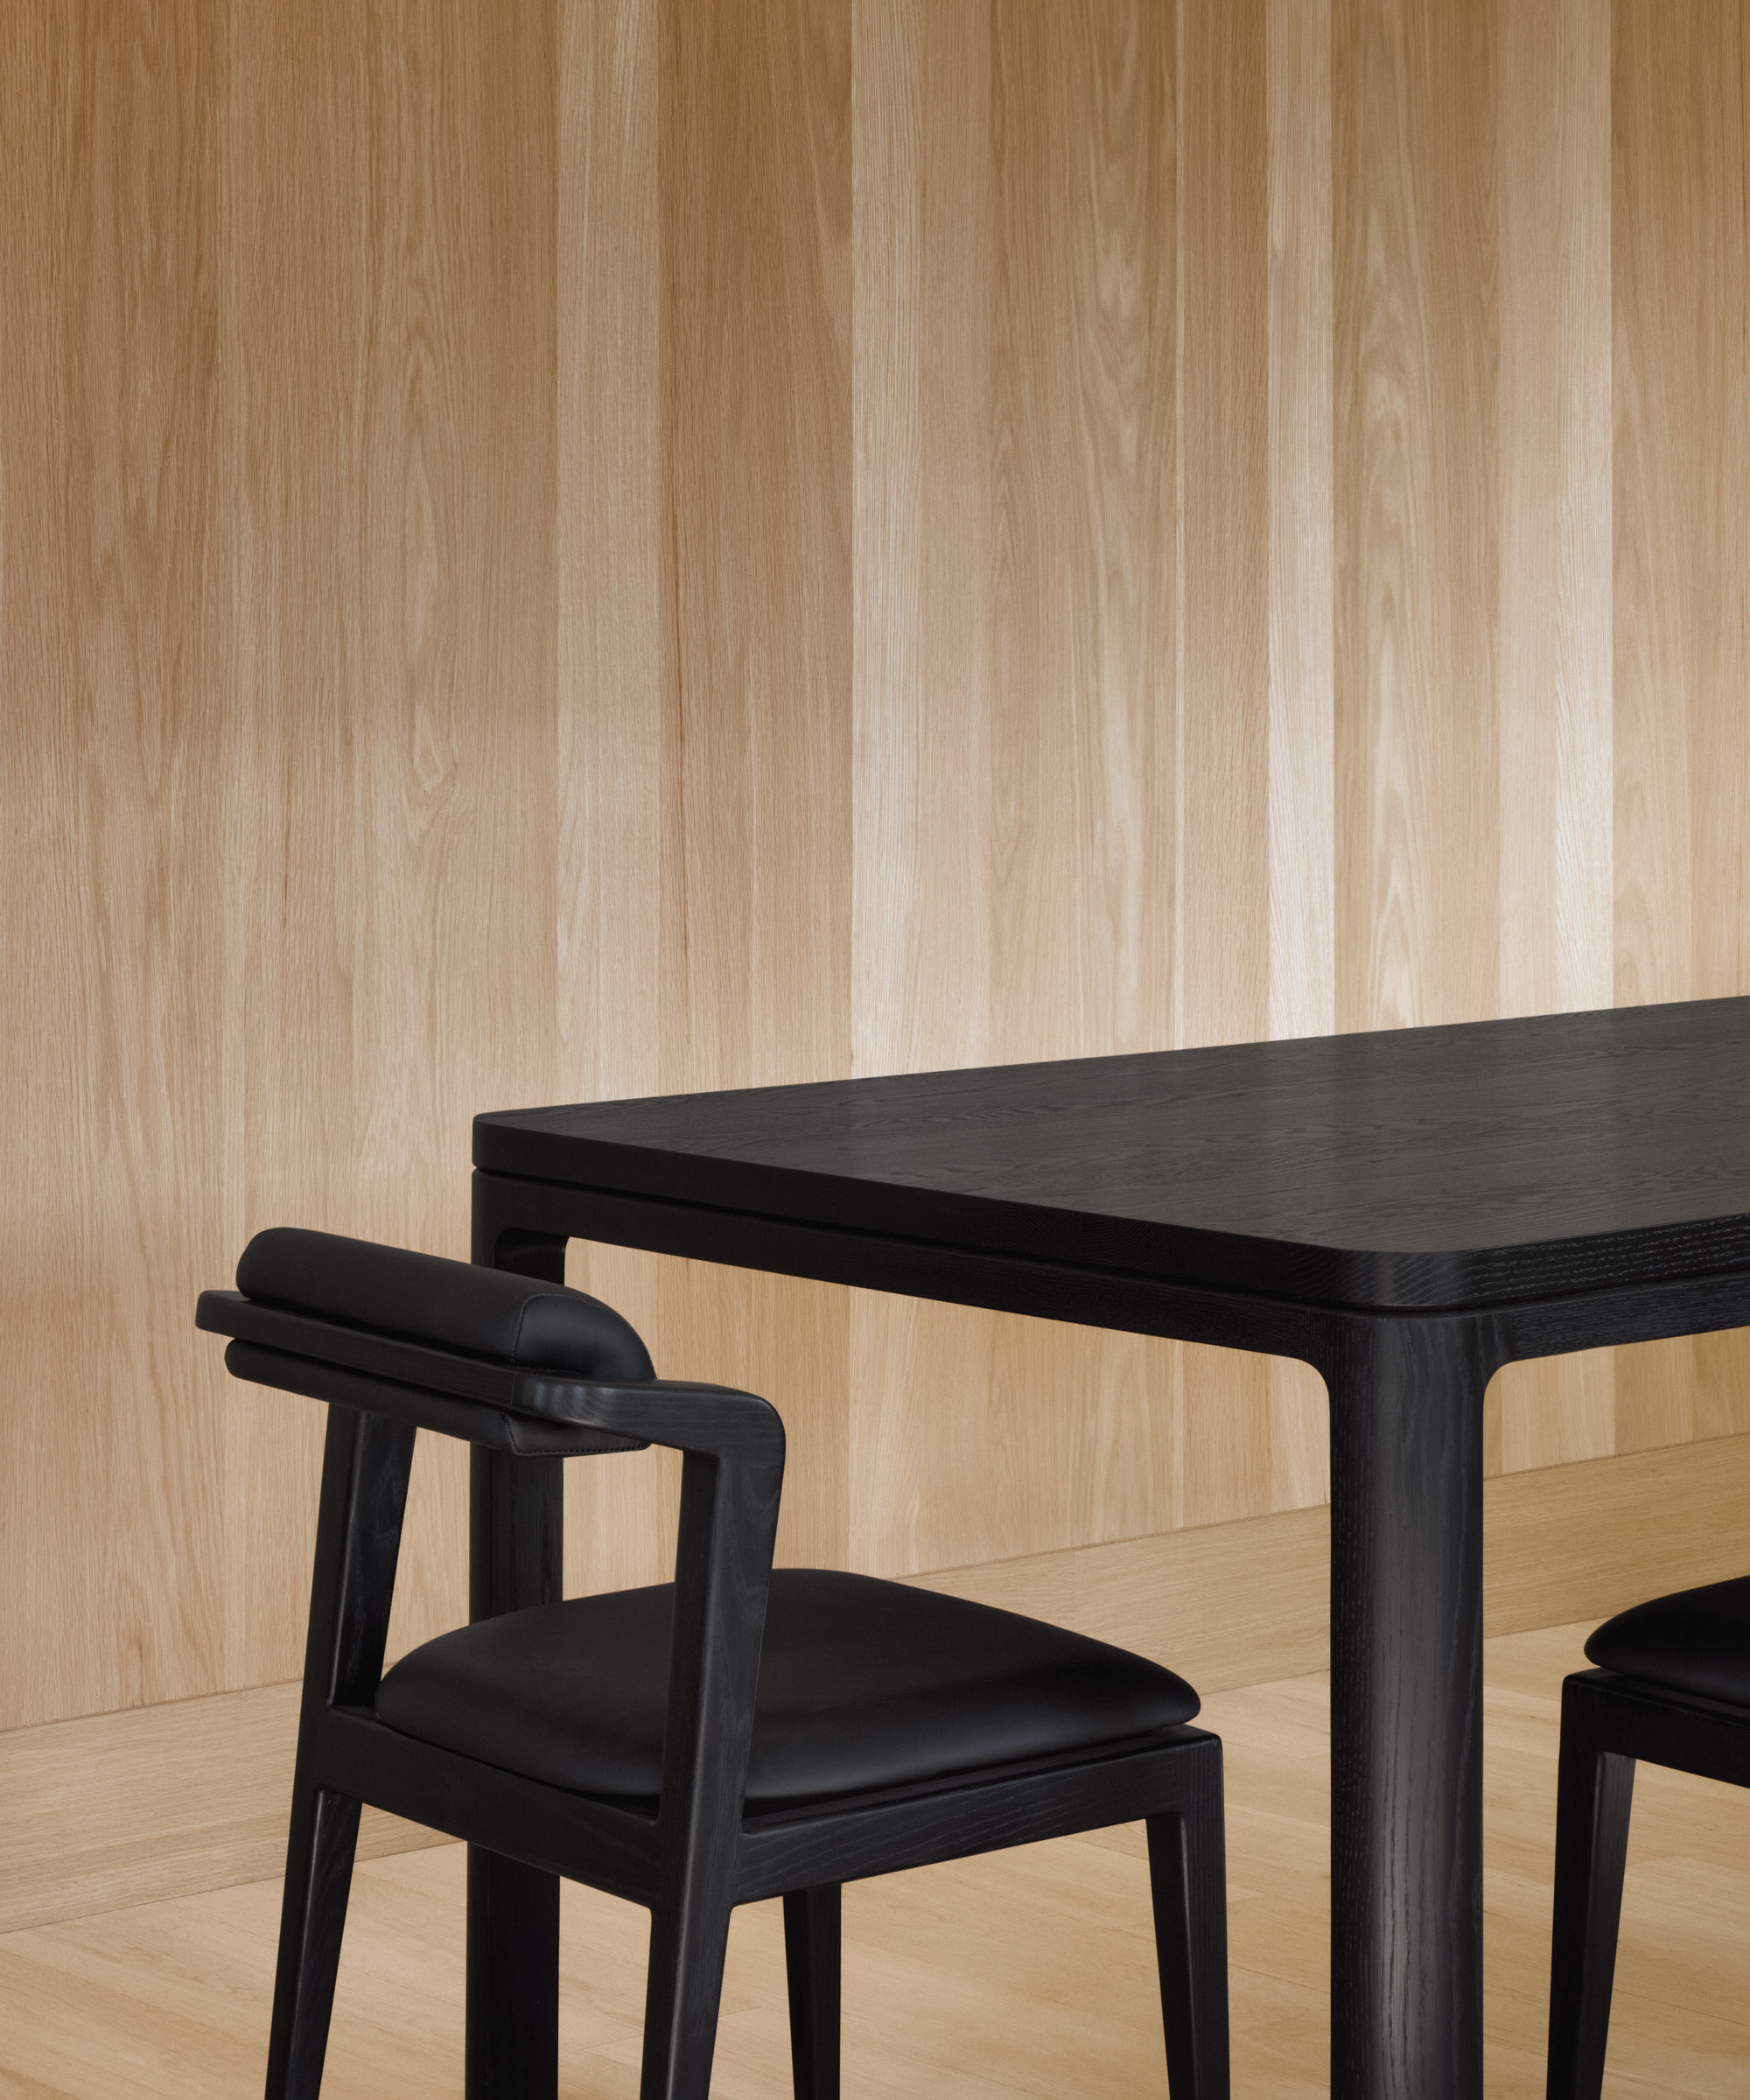 Nord chair without armrests in all black next to black Nord table